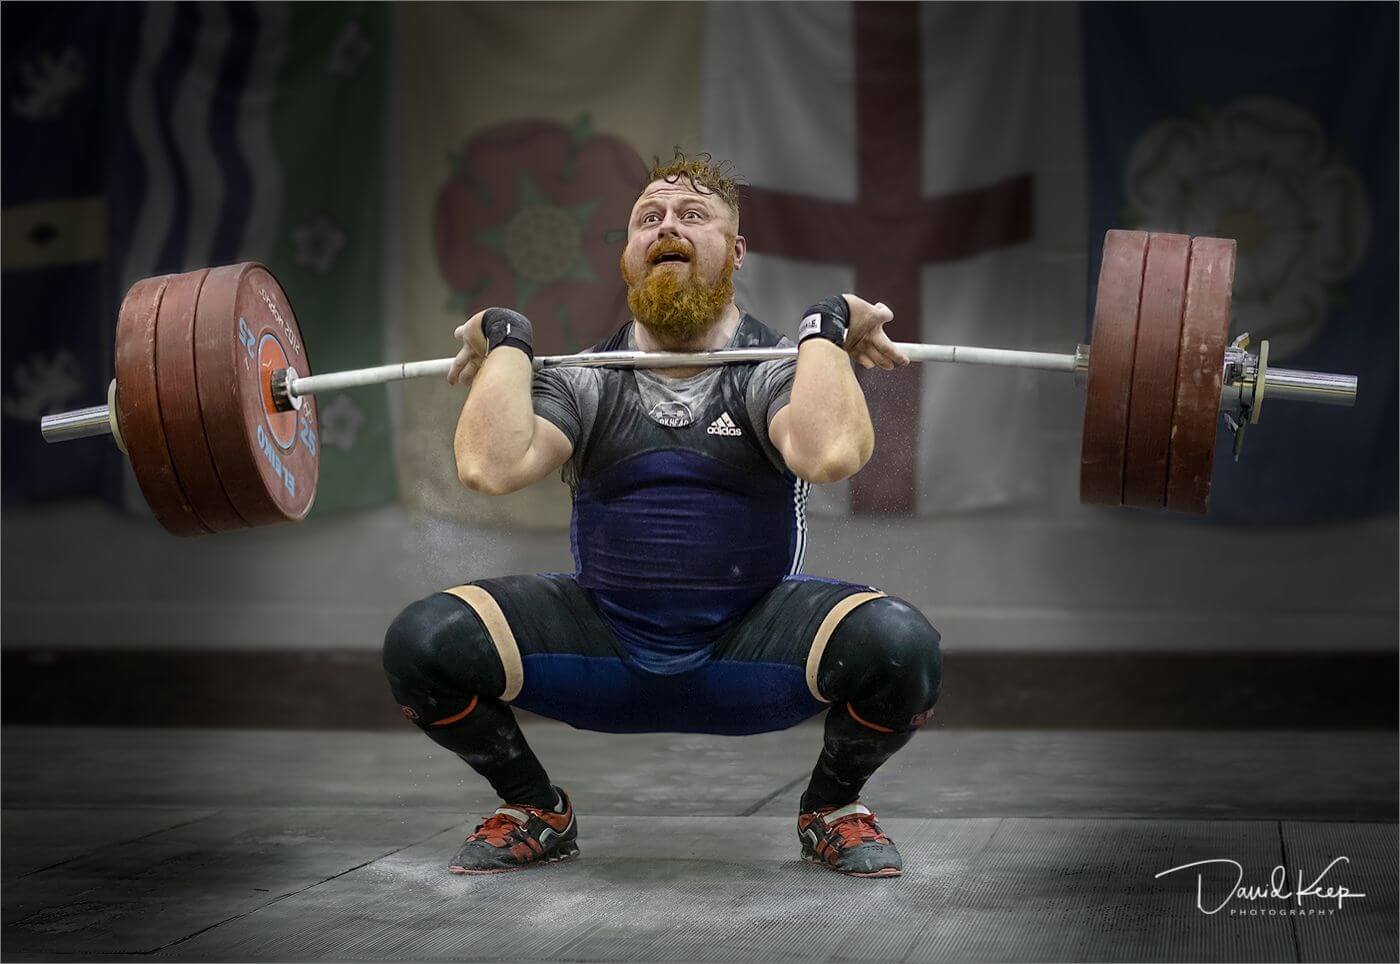 The 170kg Lift By David Keep